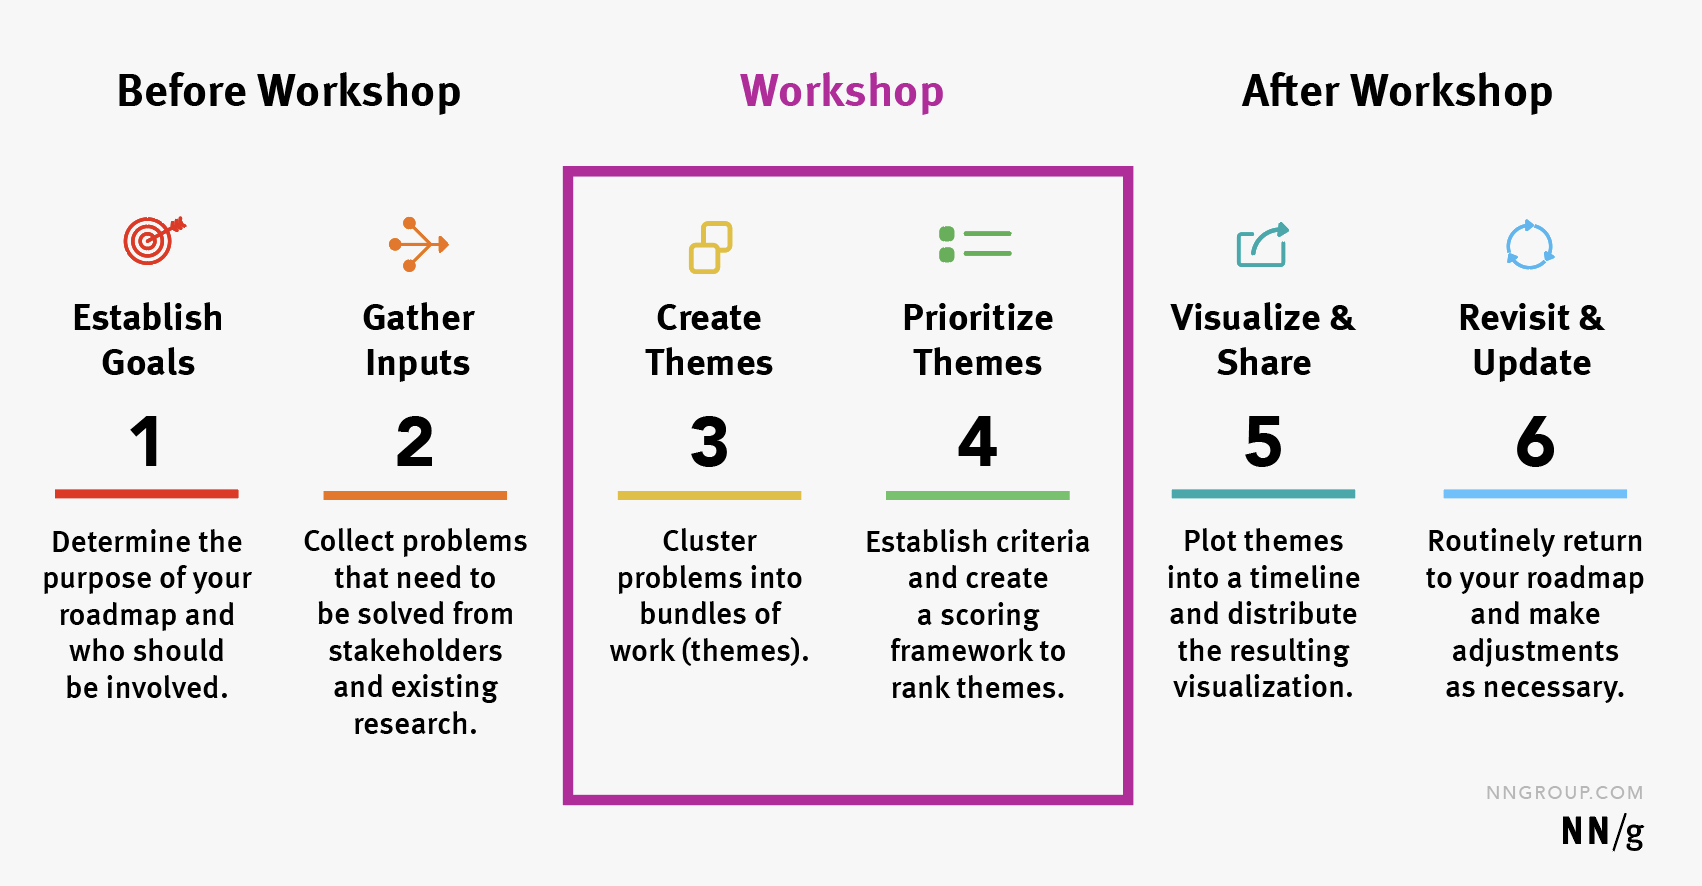 When to workshop in the roadmapping process